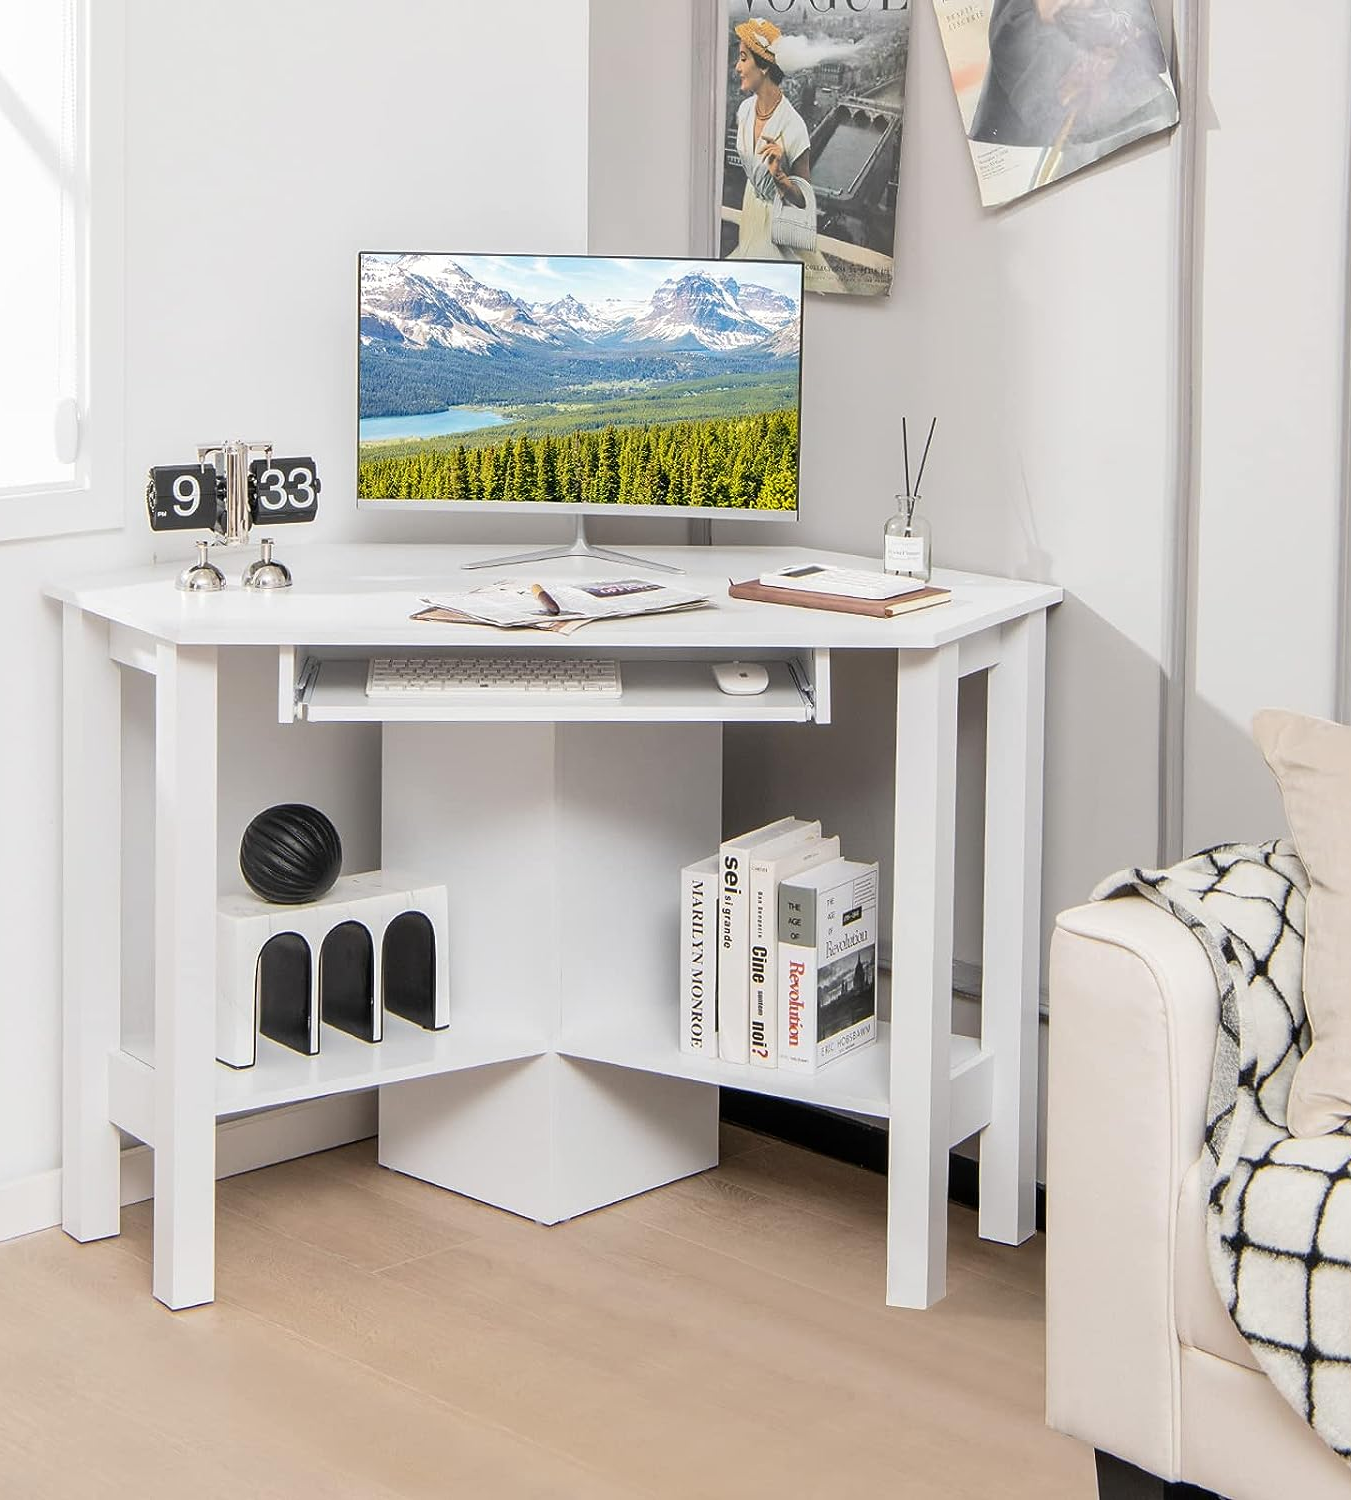 20 Top Picks of Small Desks for Your Bedroom